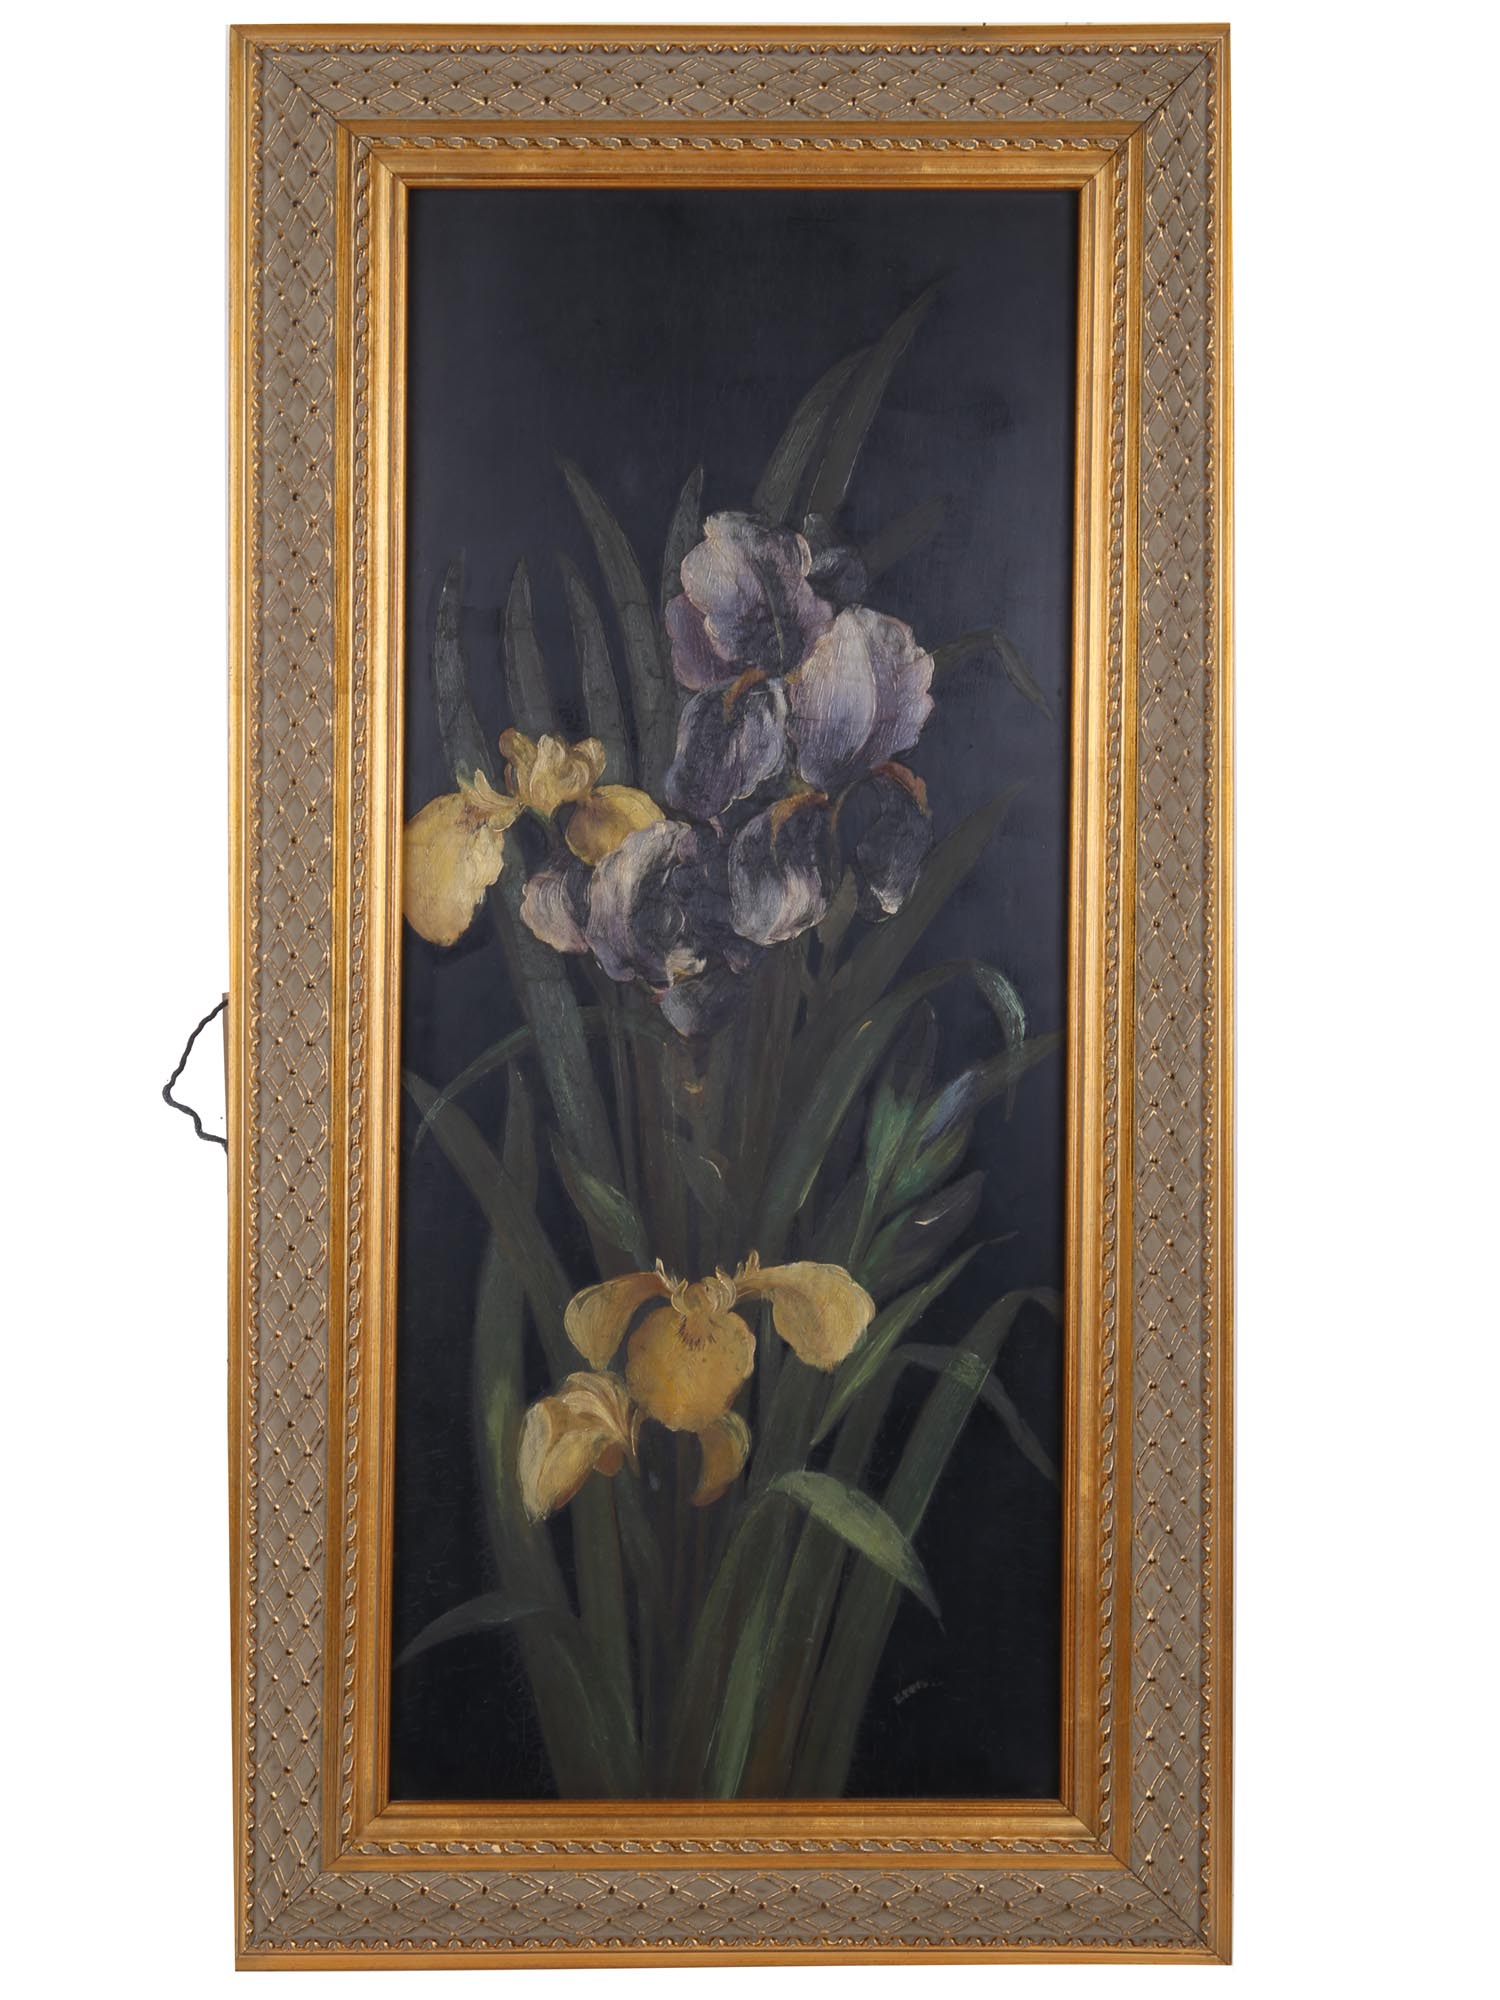 ATTRIBUTED TO EDWARD POVEY OIL PAINTING FLOWERS PIC-0